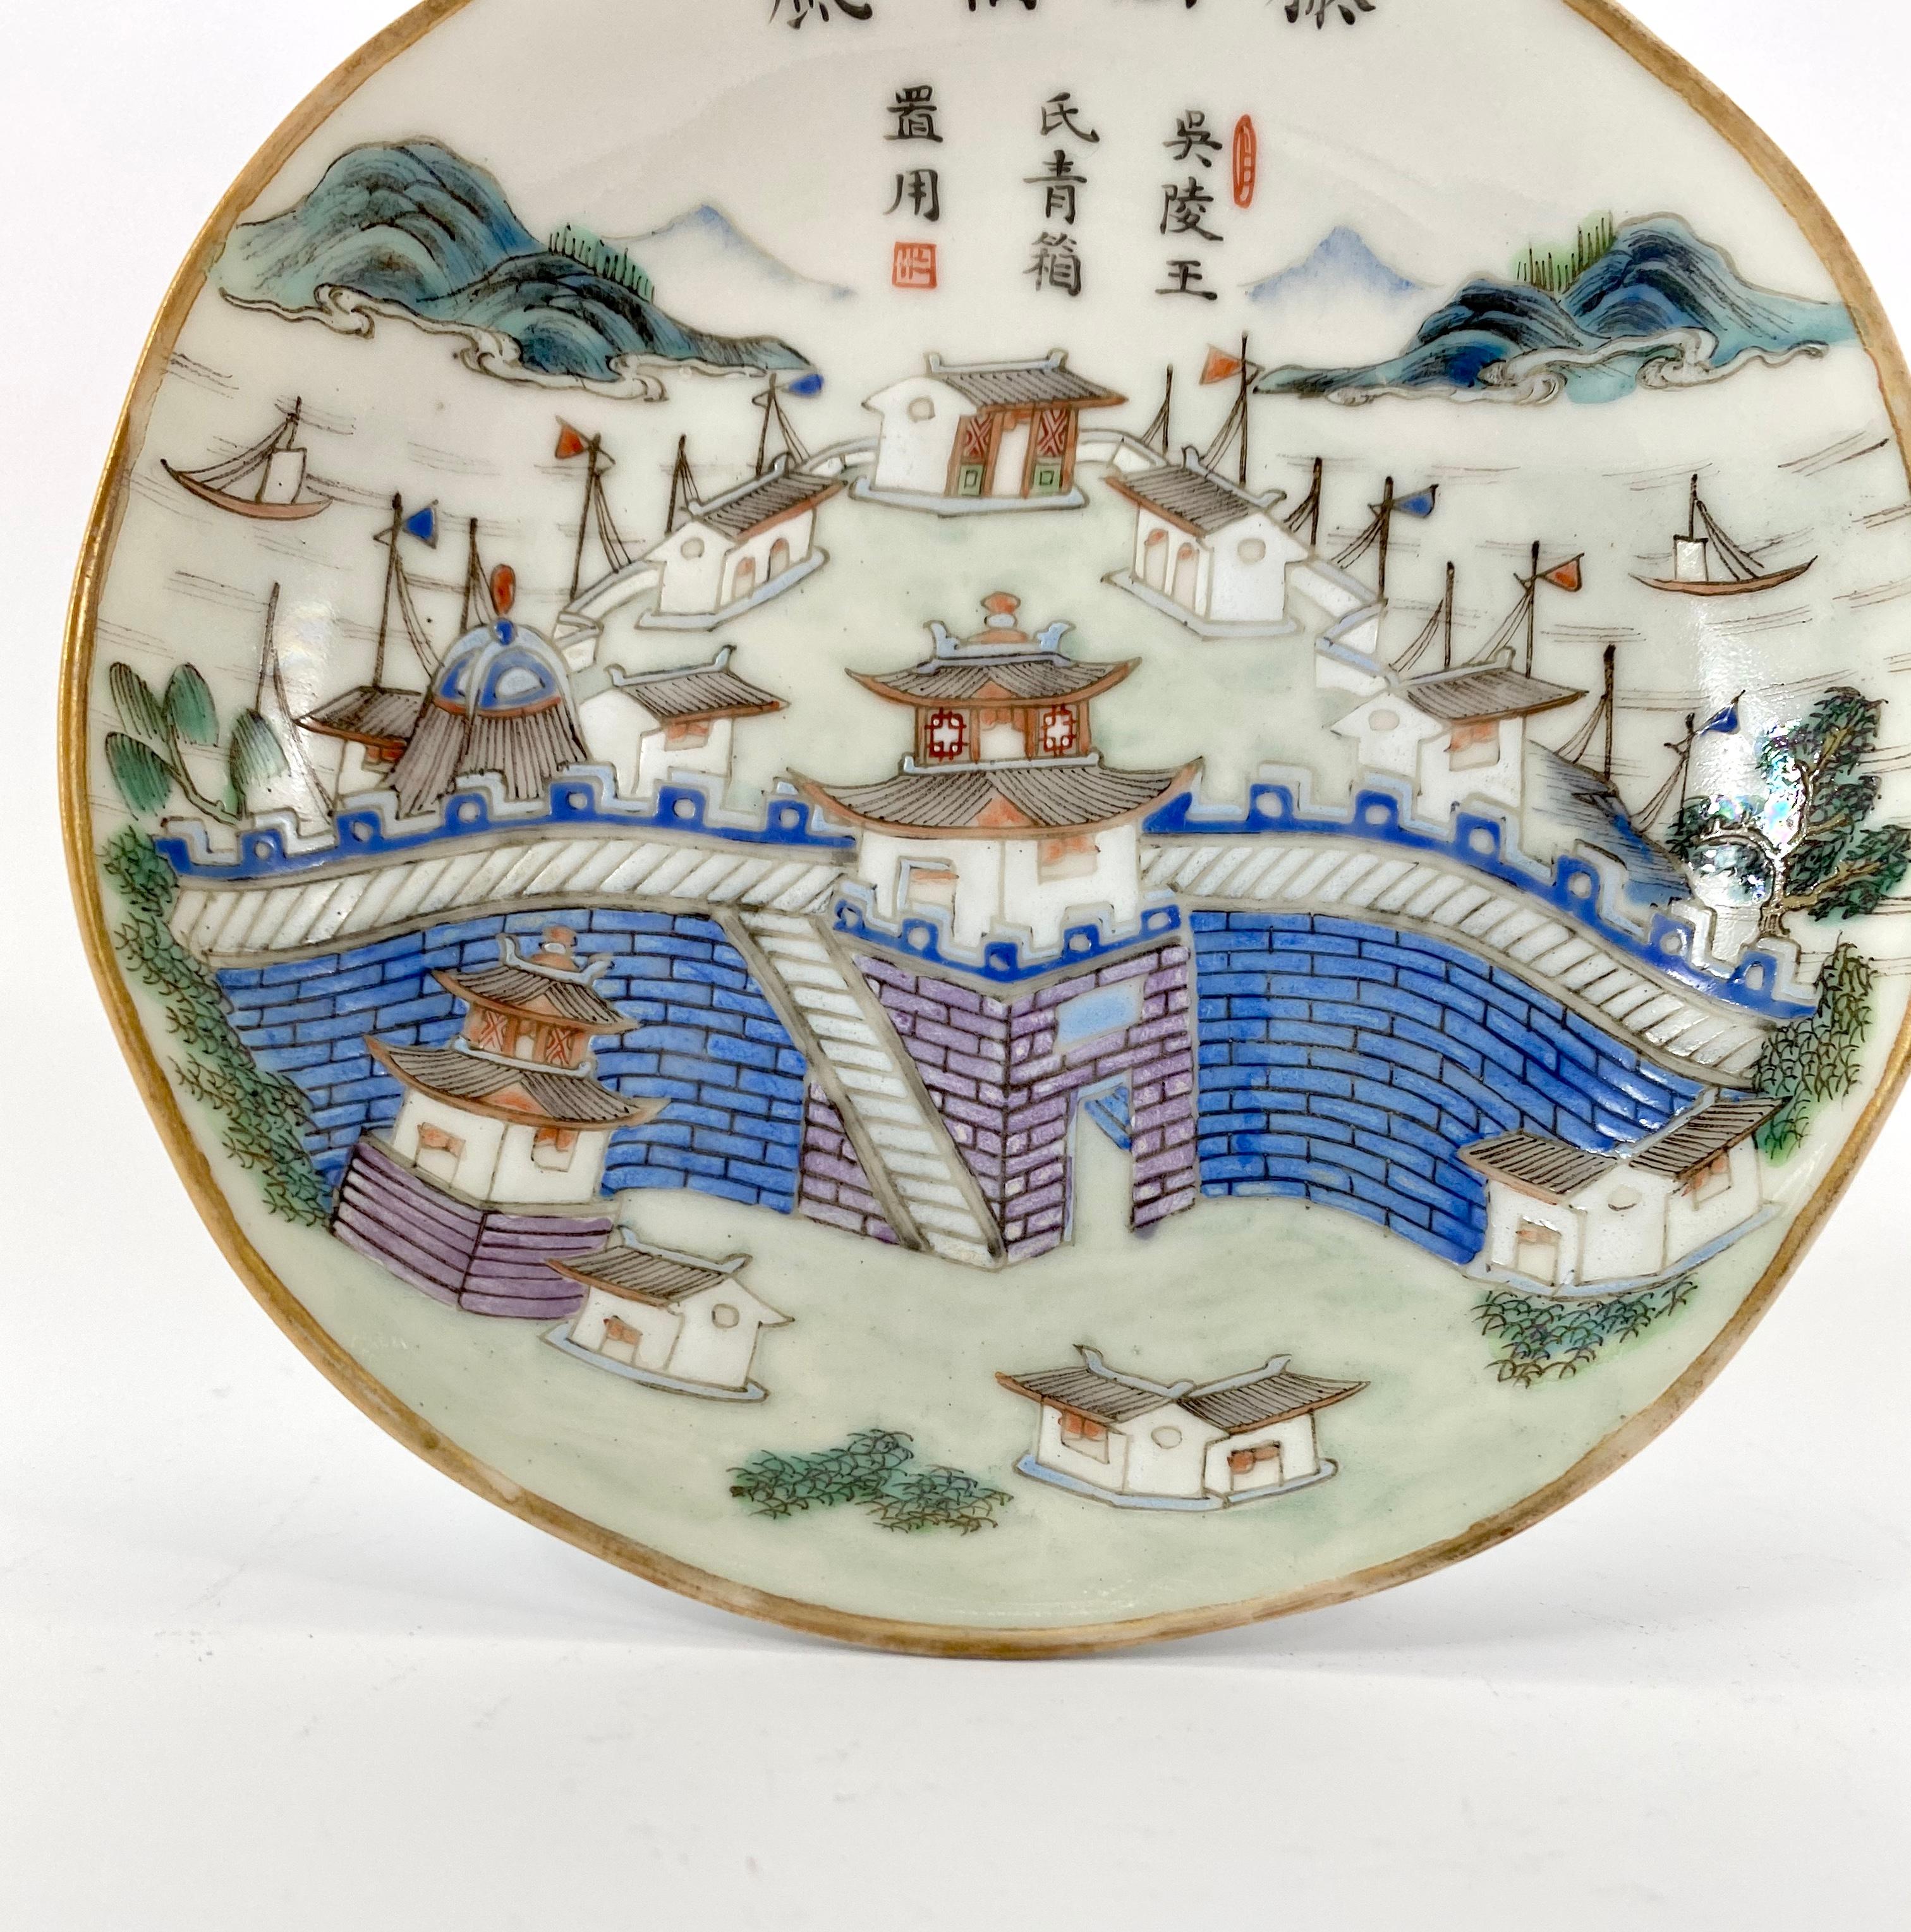 Chinese porcelain dish, Tongzhi mark and period (1862-1874). Well painted in famille rose or fencai enamels, with a titled scene reading 'Teng ge gao feng' that may be translated as 'High Winds at the Pavilion of Prince Teng', circa 1865. The